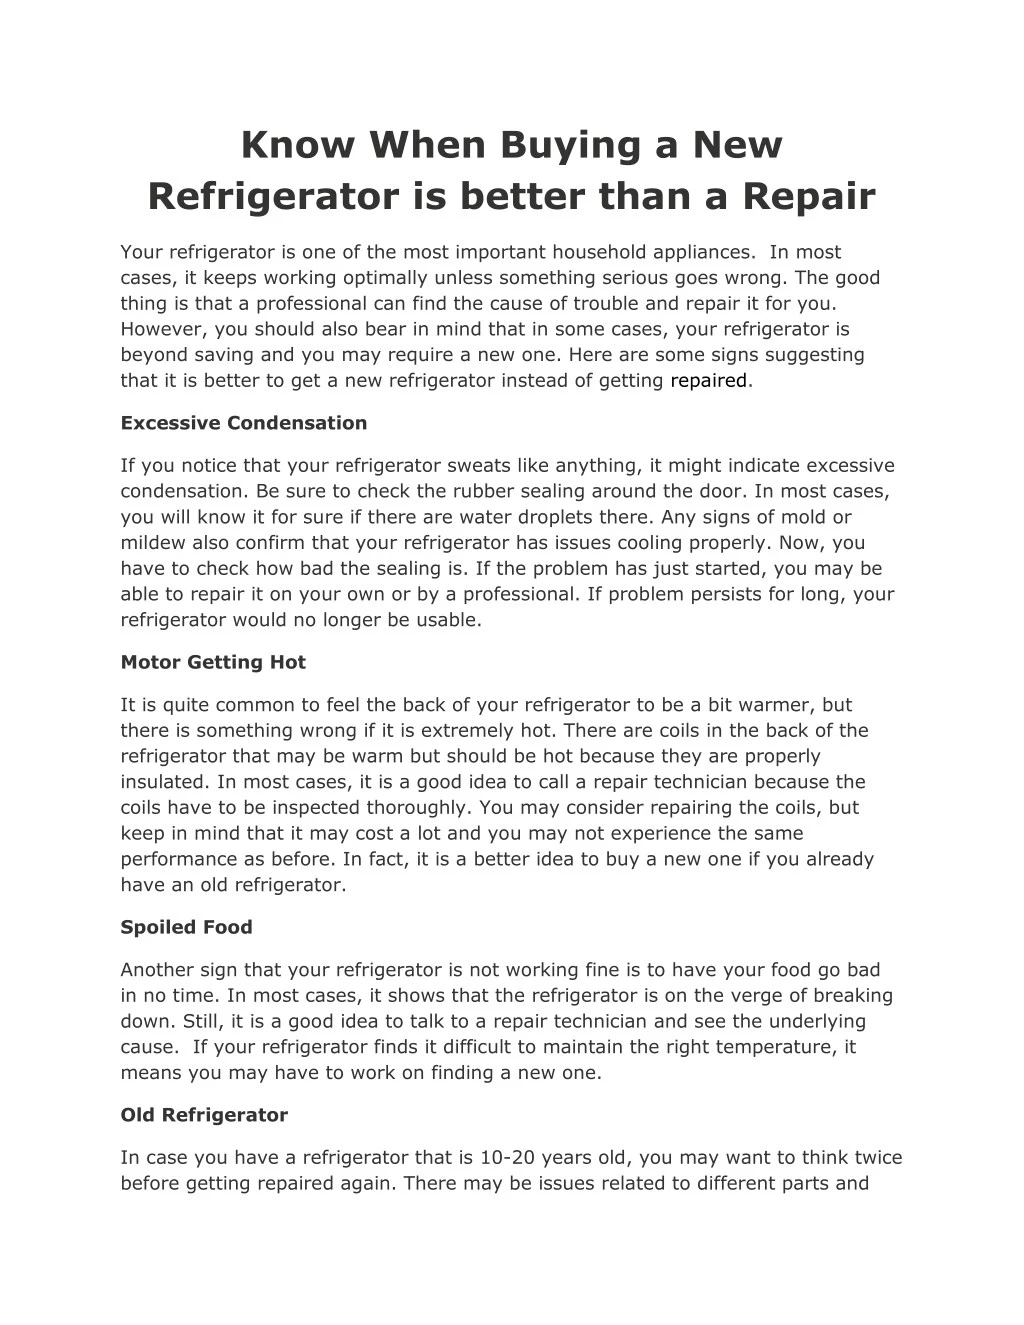 know when buying a new refrigerator is better